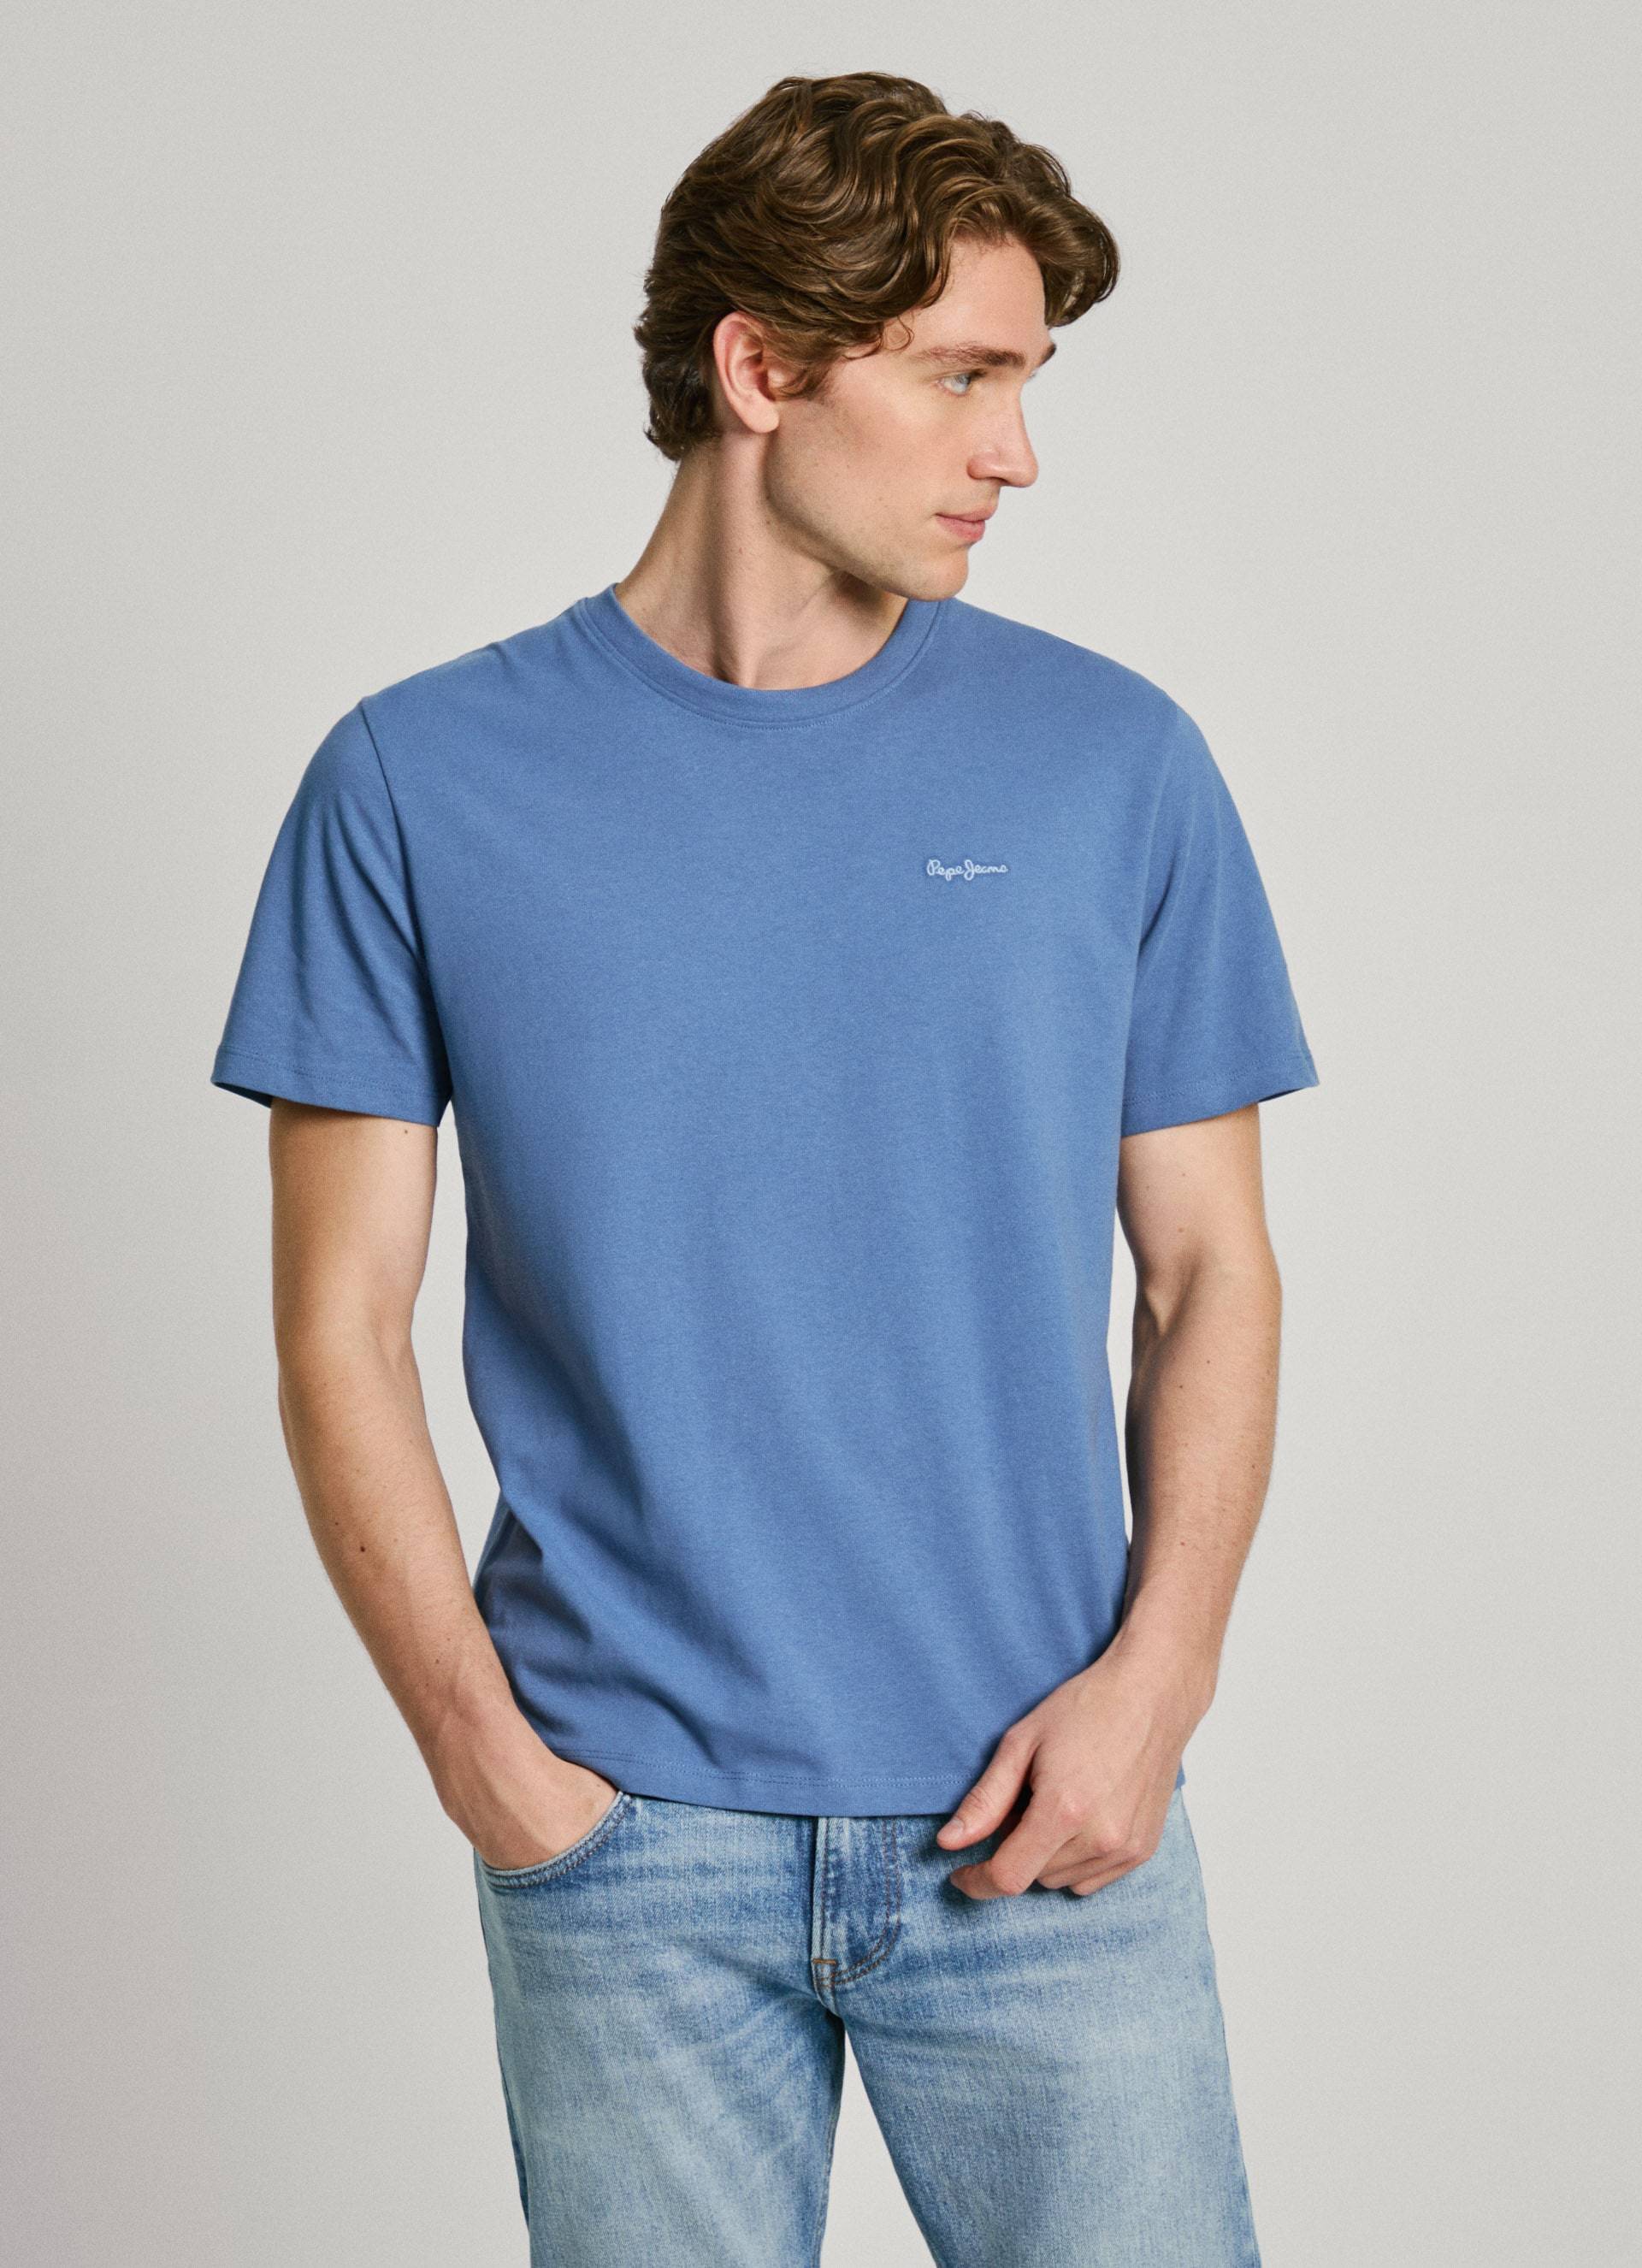 Pepe Jeans T-Shirt »CONNOR« von Pepe Jeans